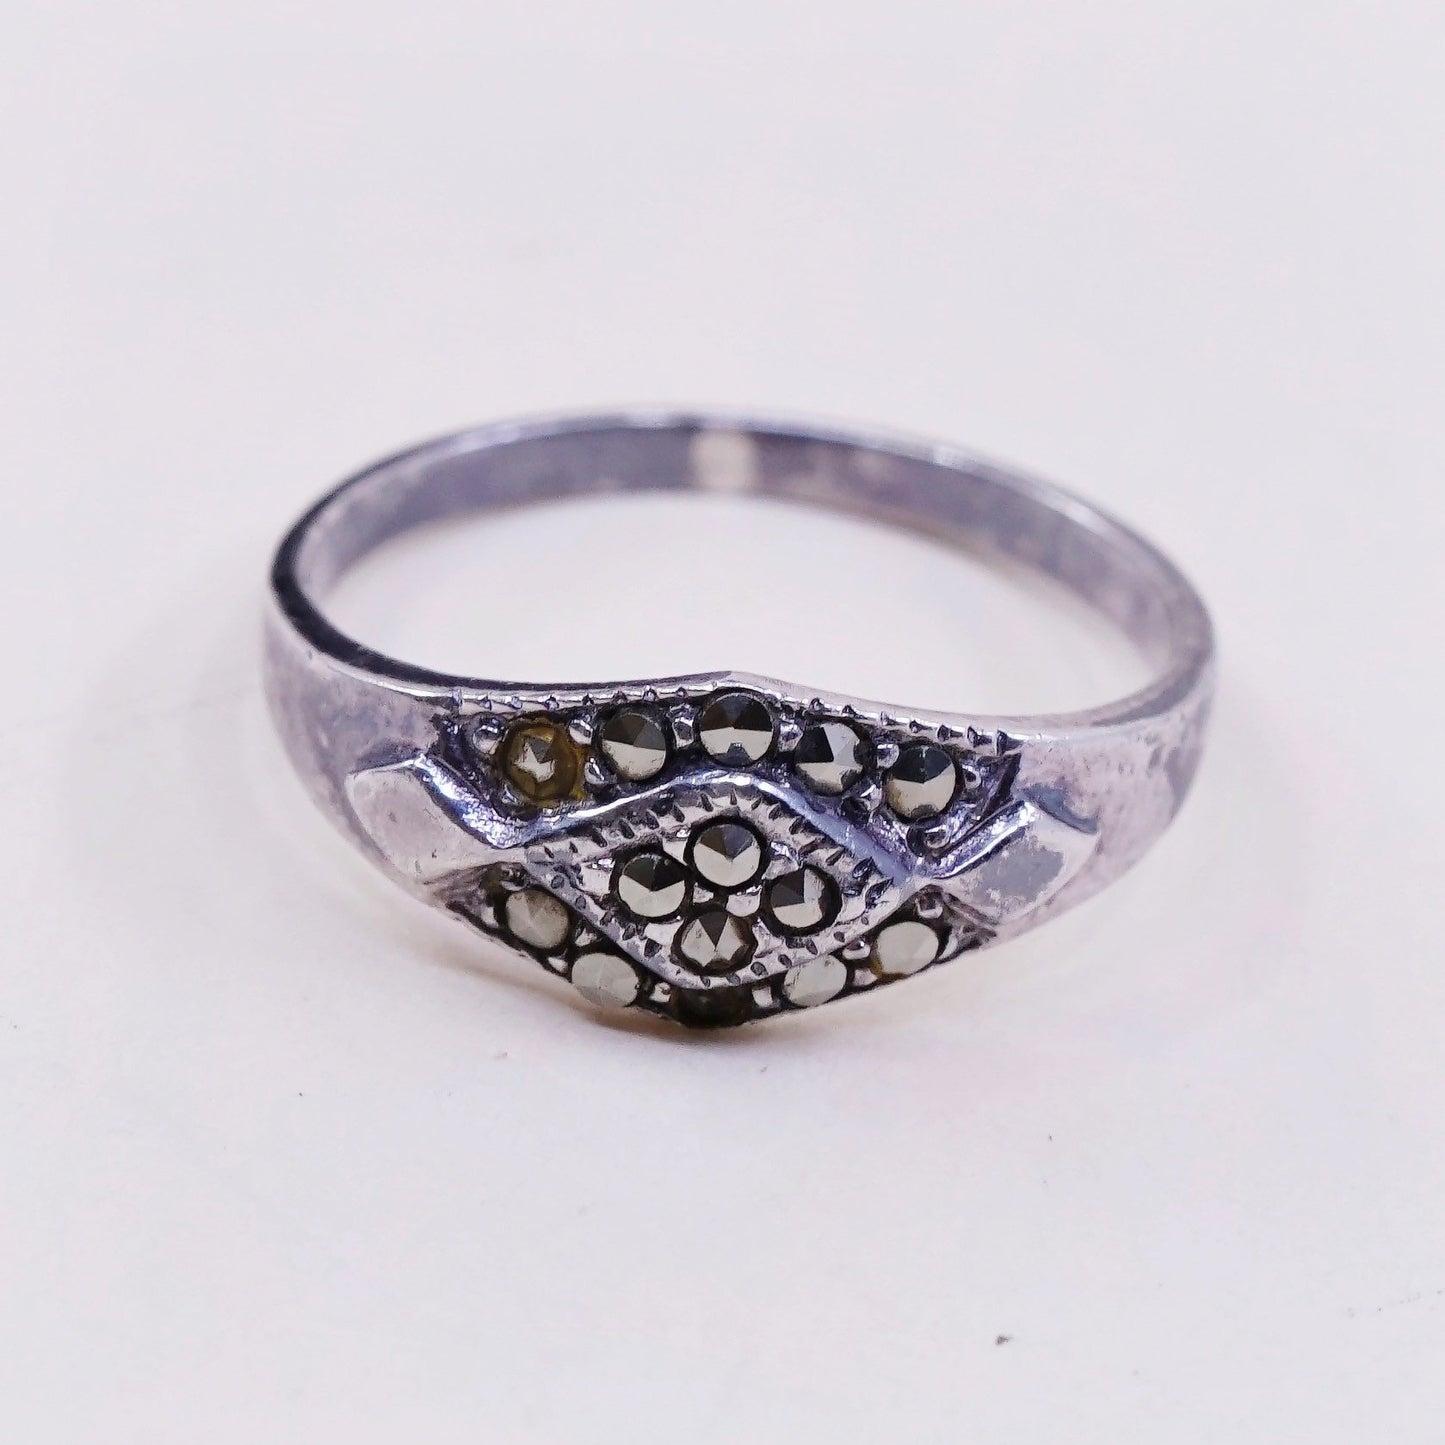 Size 6, Vintage Sterling 925 silver handmade ring with marcasite, stamped 925